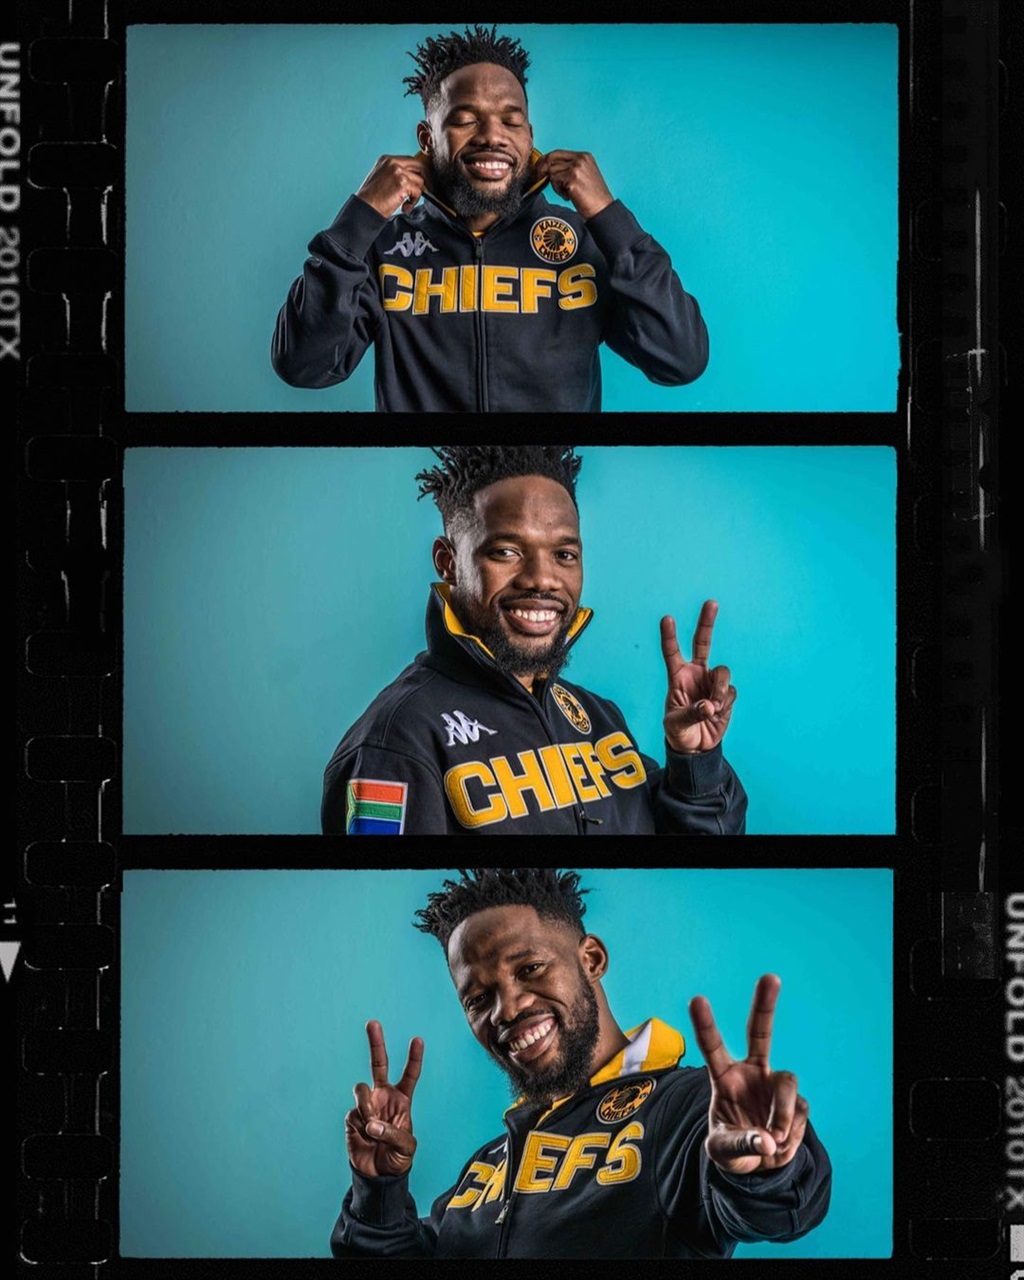 Kaizer Chiefs reveal their new signings wearing th